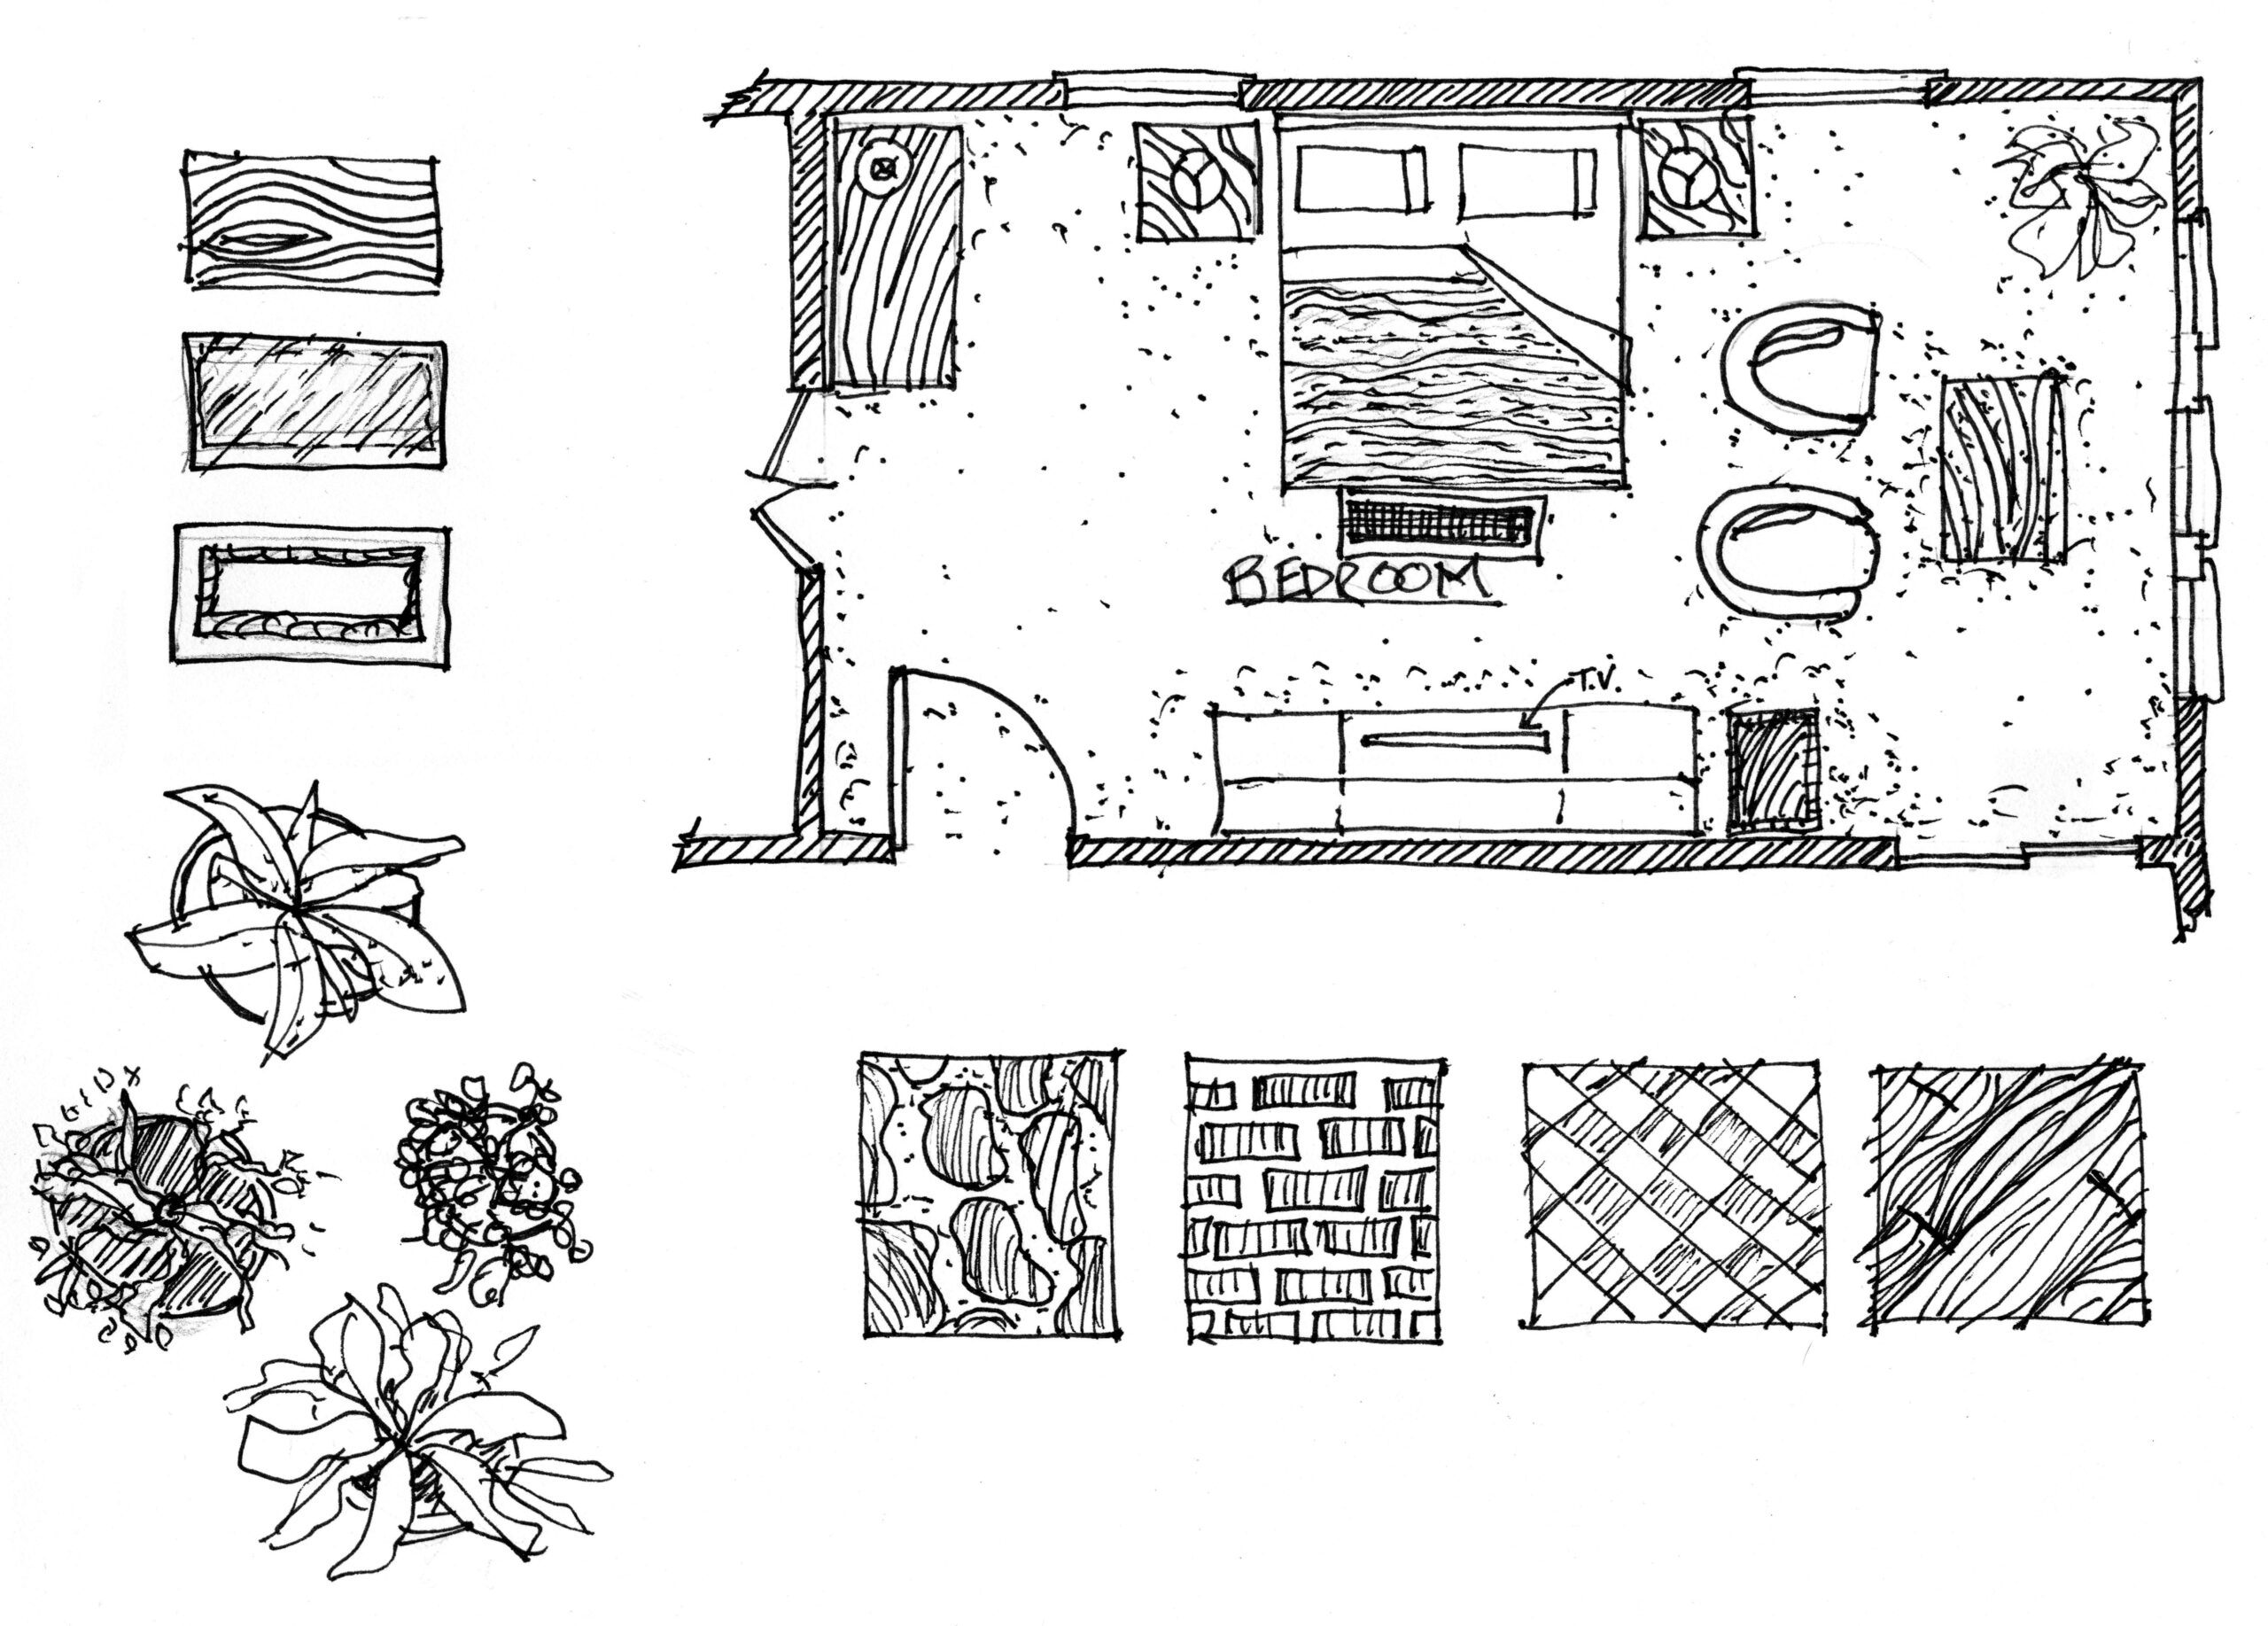 Fantastic pinandy brody on ideas for final piece | plan sketch, floor plan regarding gorgeous how to draw a floor plan by hand